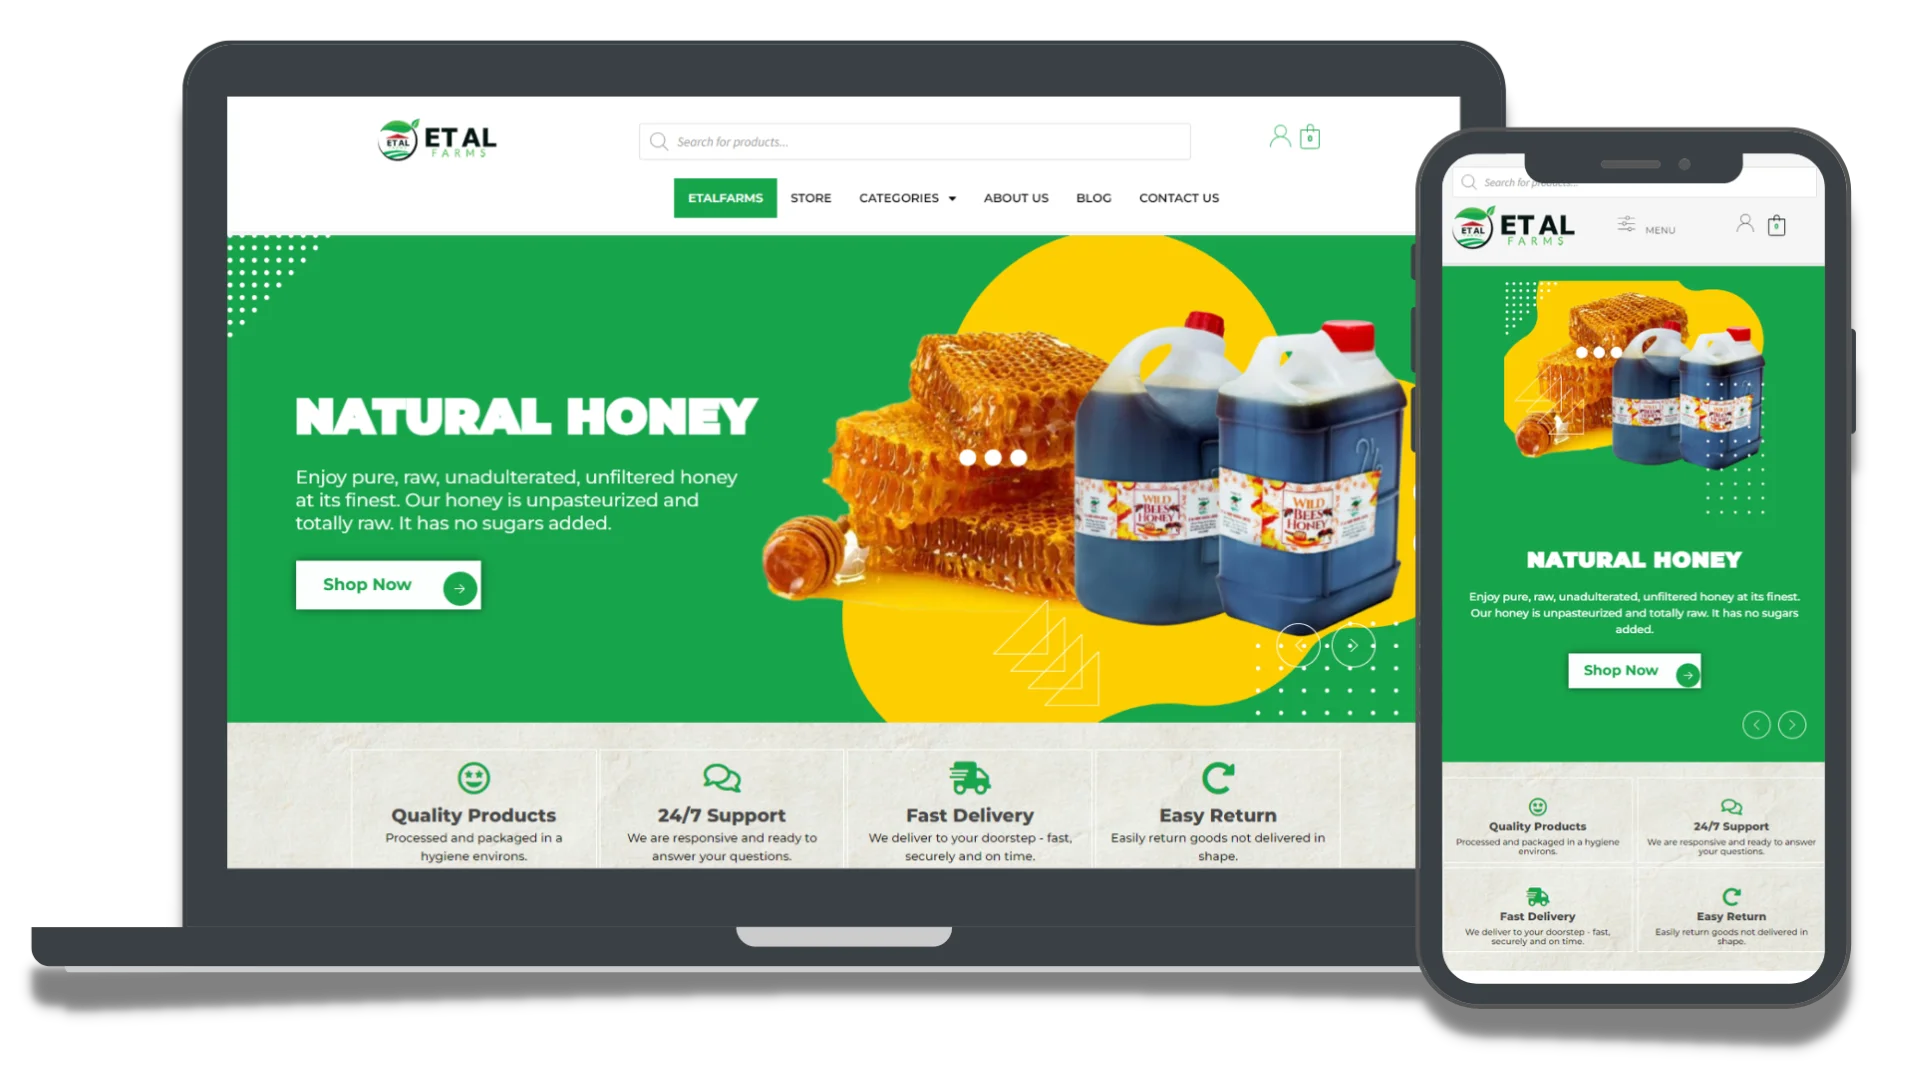 You are currently viewing Etalfarms website